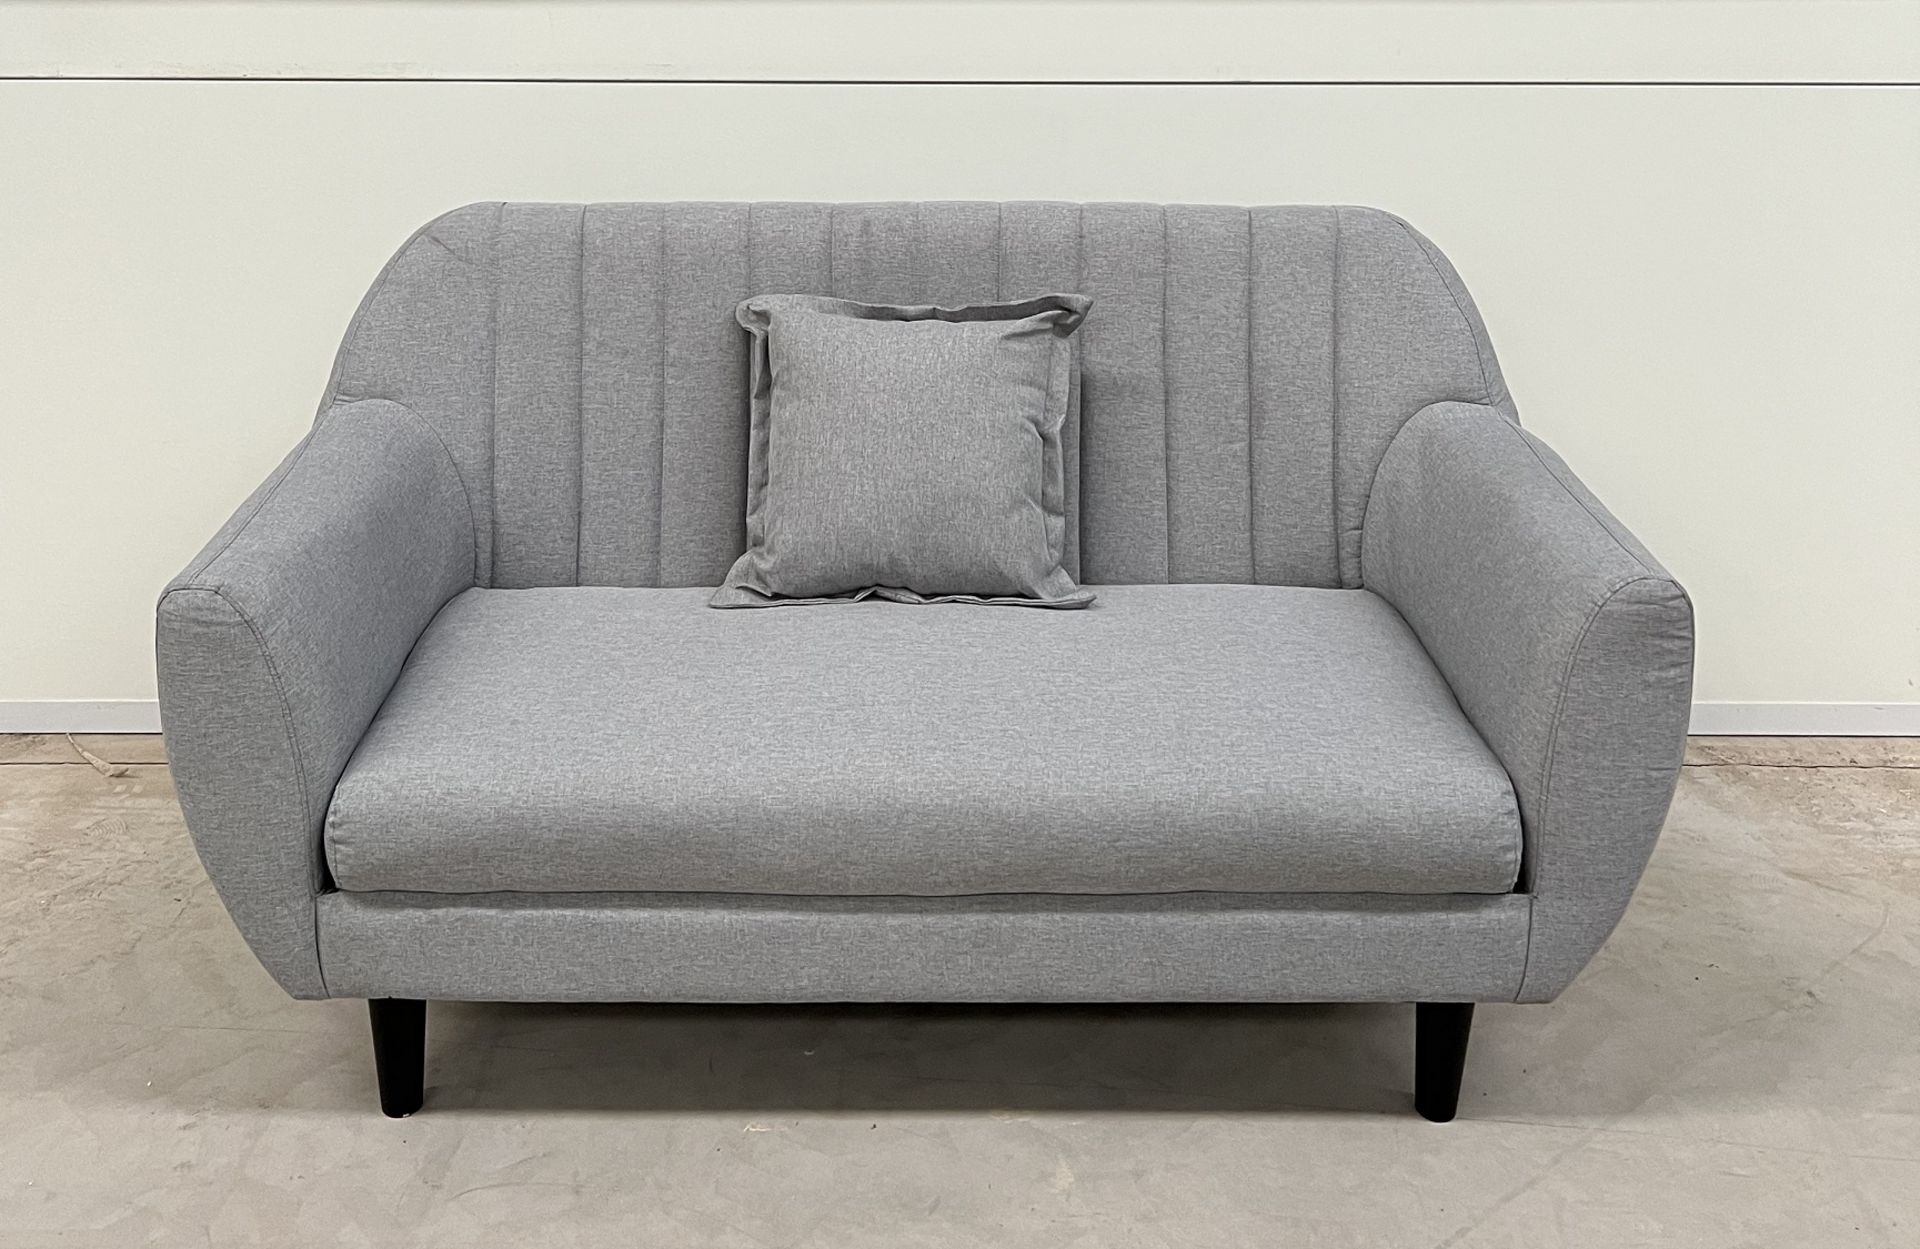 Grey Linen Upholstered Sofa A Comfortable And Practical Sofa Contemporary In Design And Super